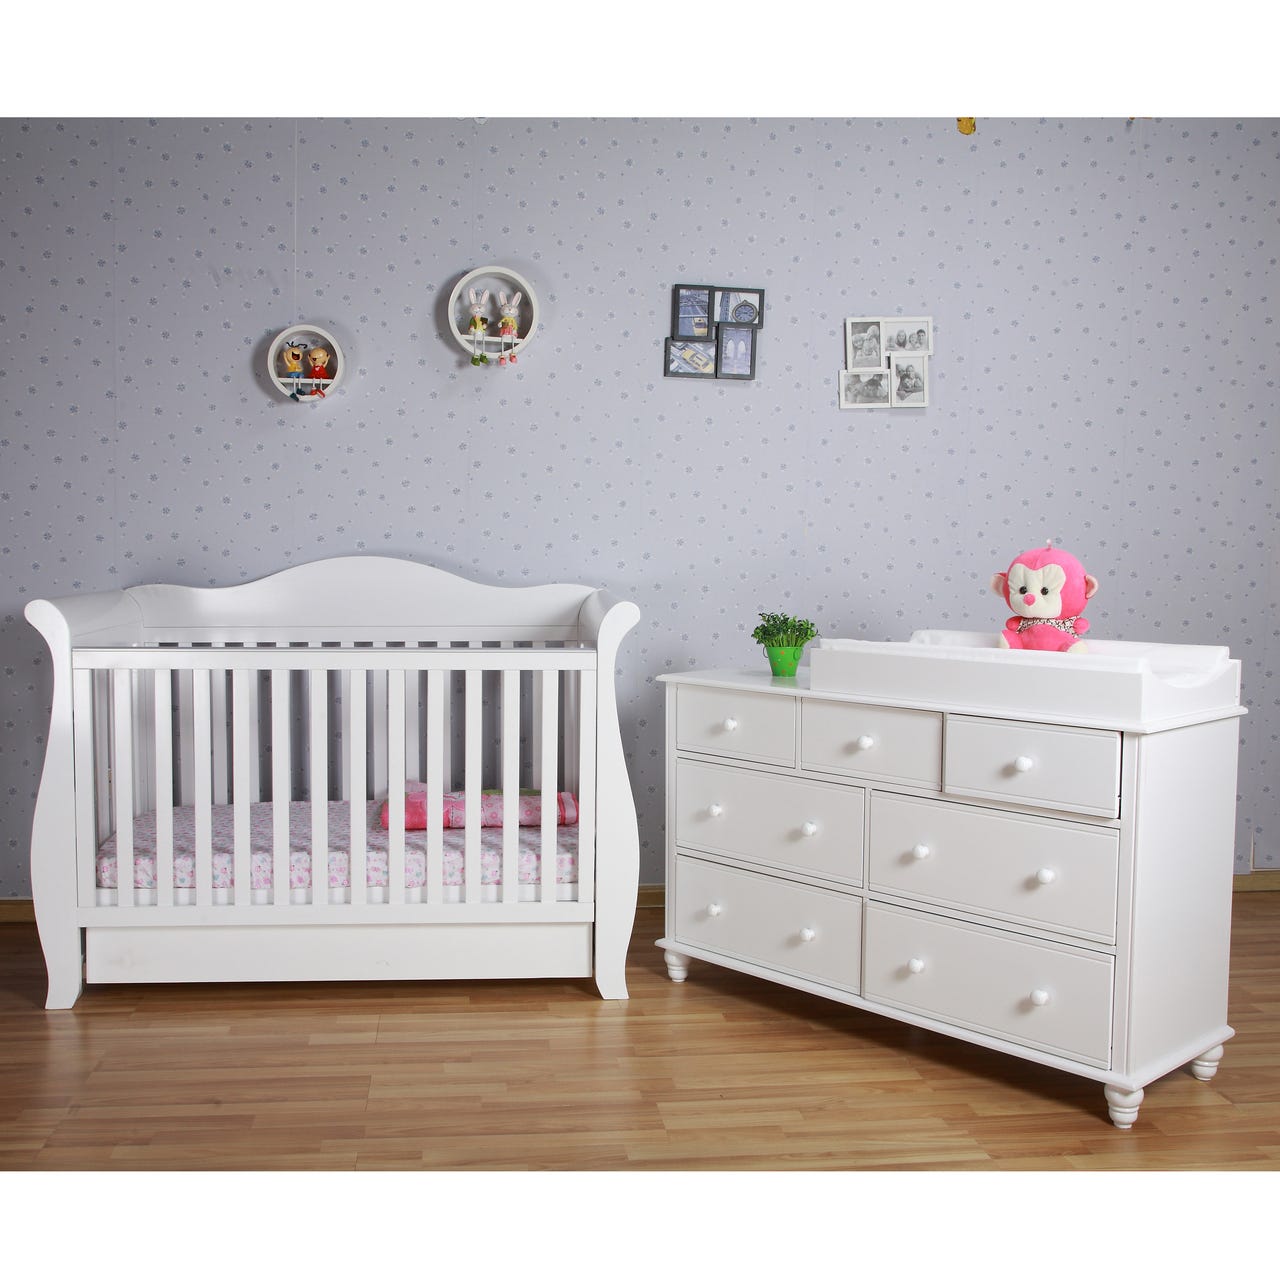 What Every Parent Should Know Before Buying Nursery Furniture Package